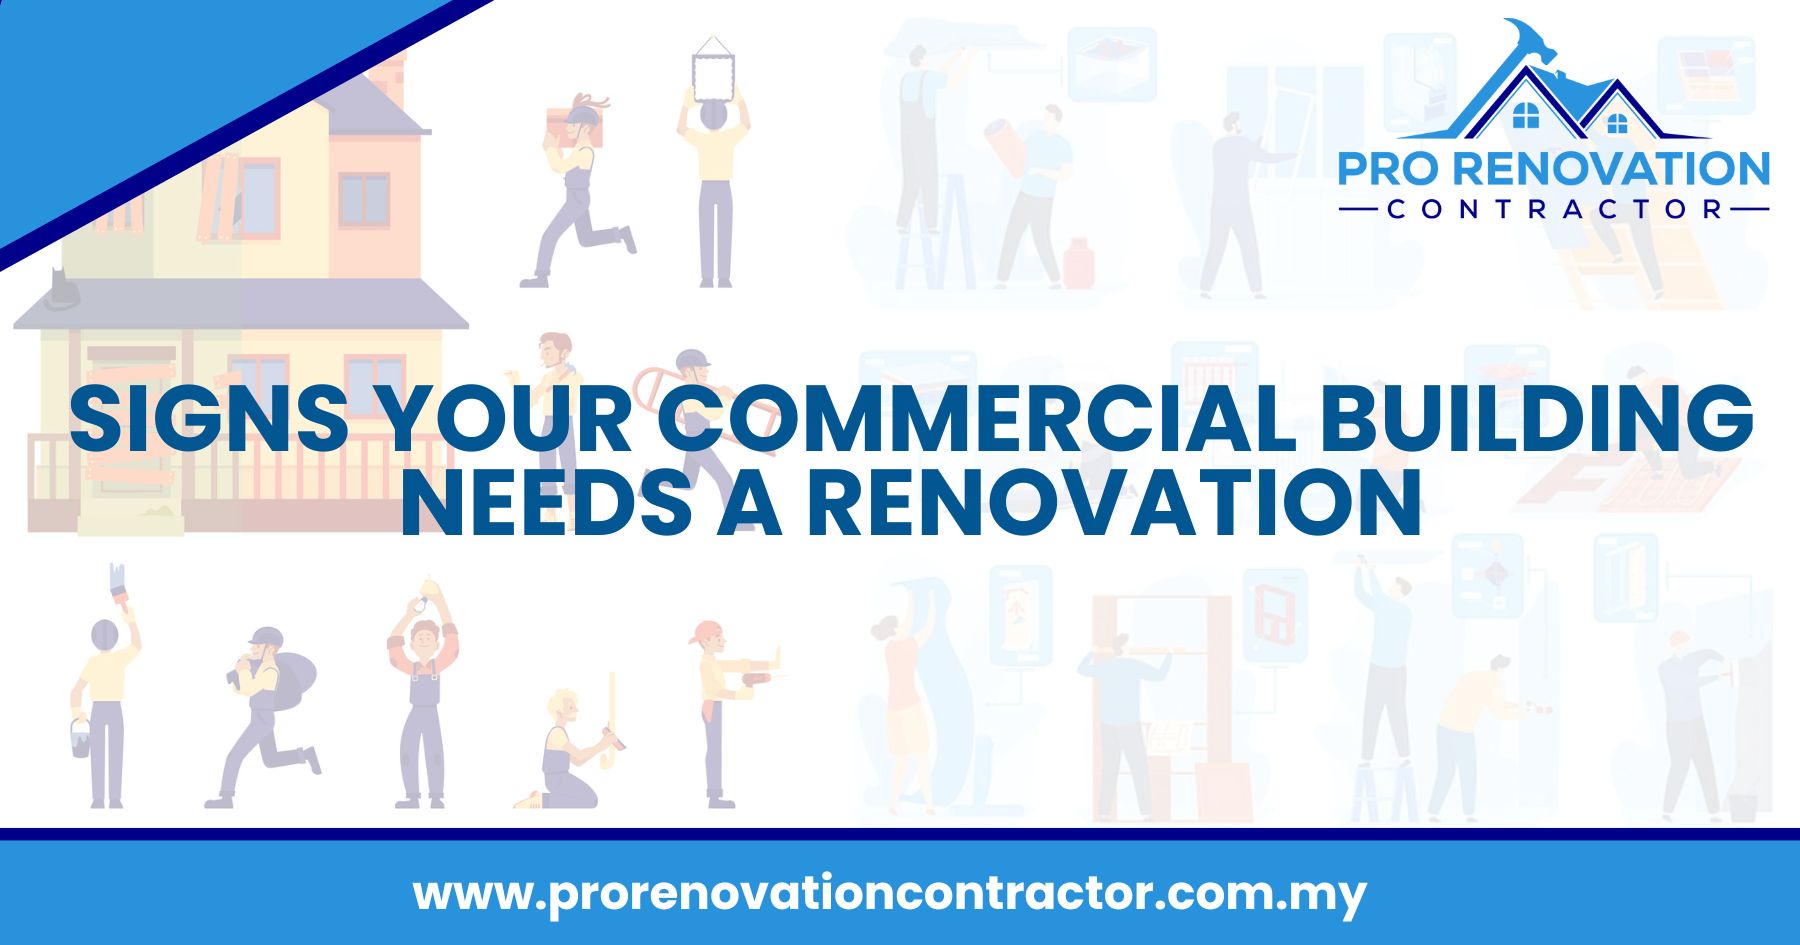 Signs Your Commercial Building Needs a Renovation